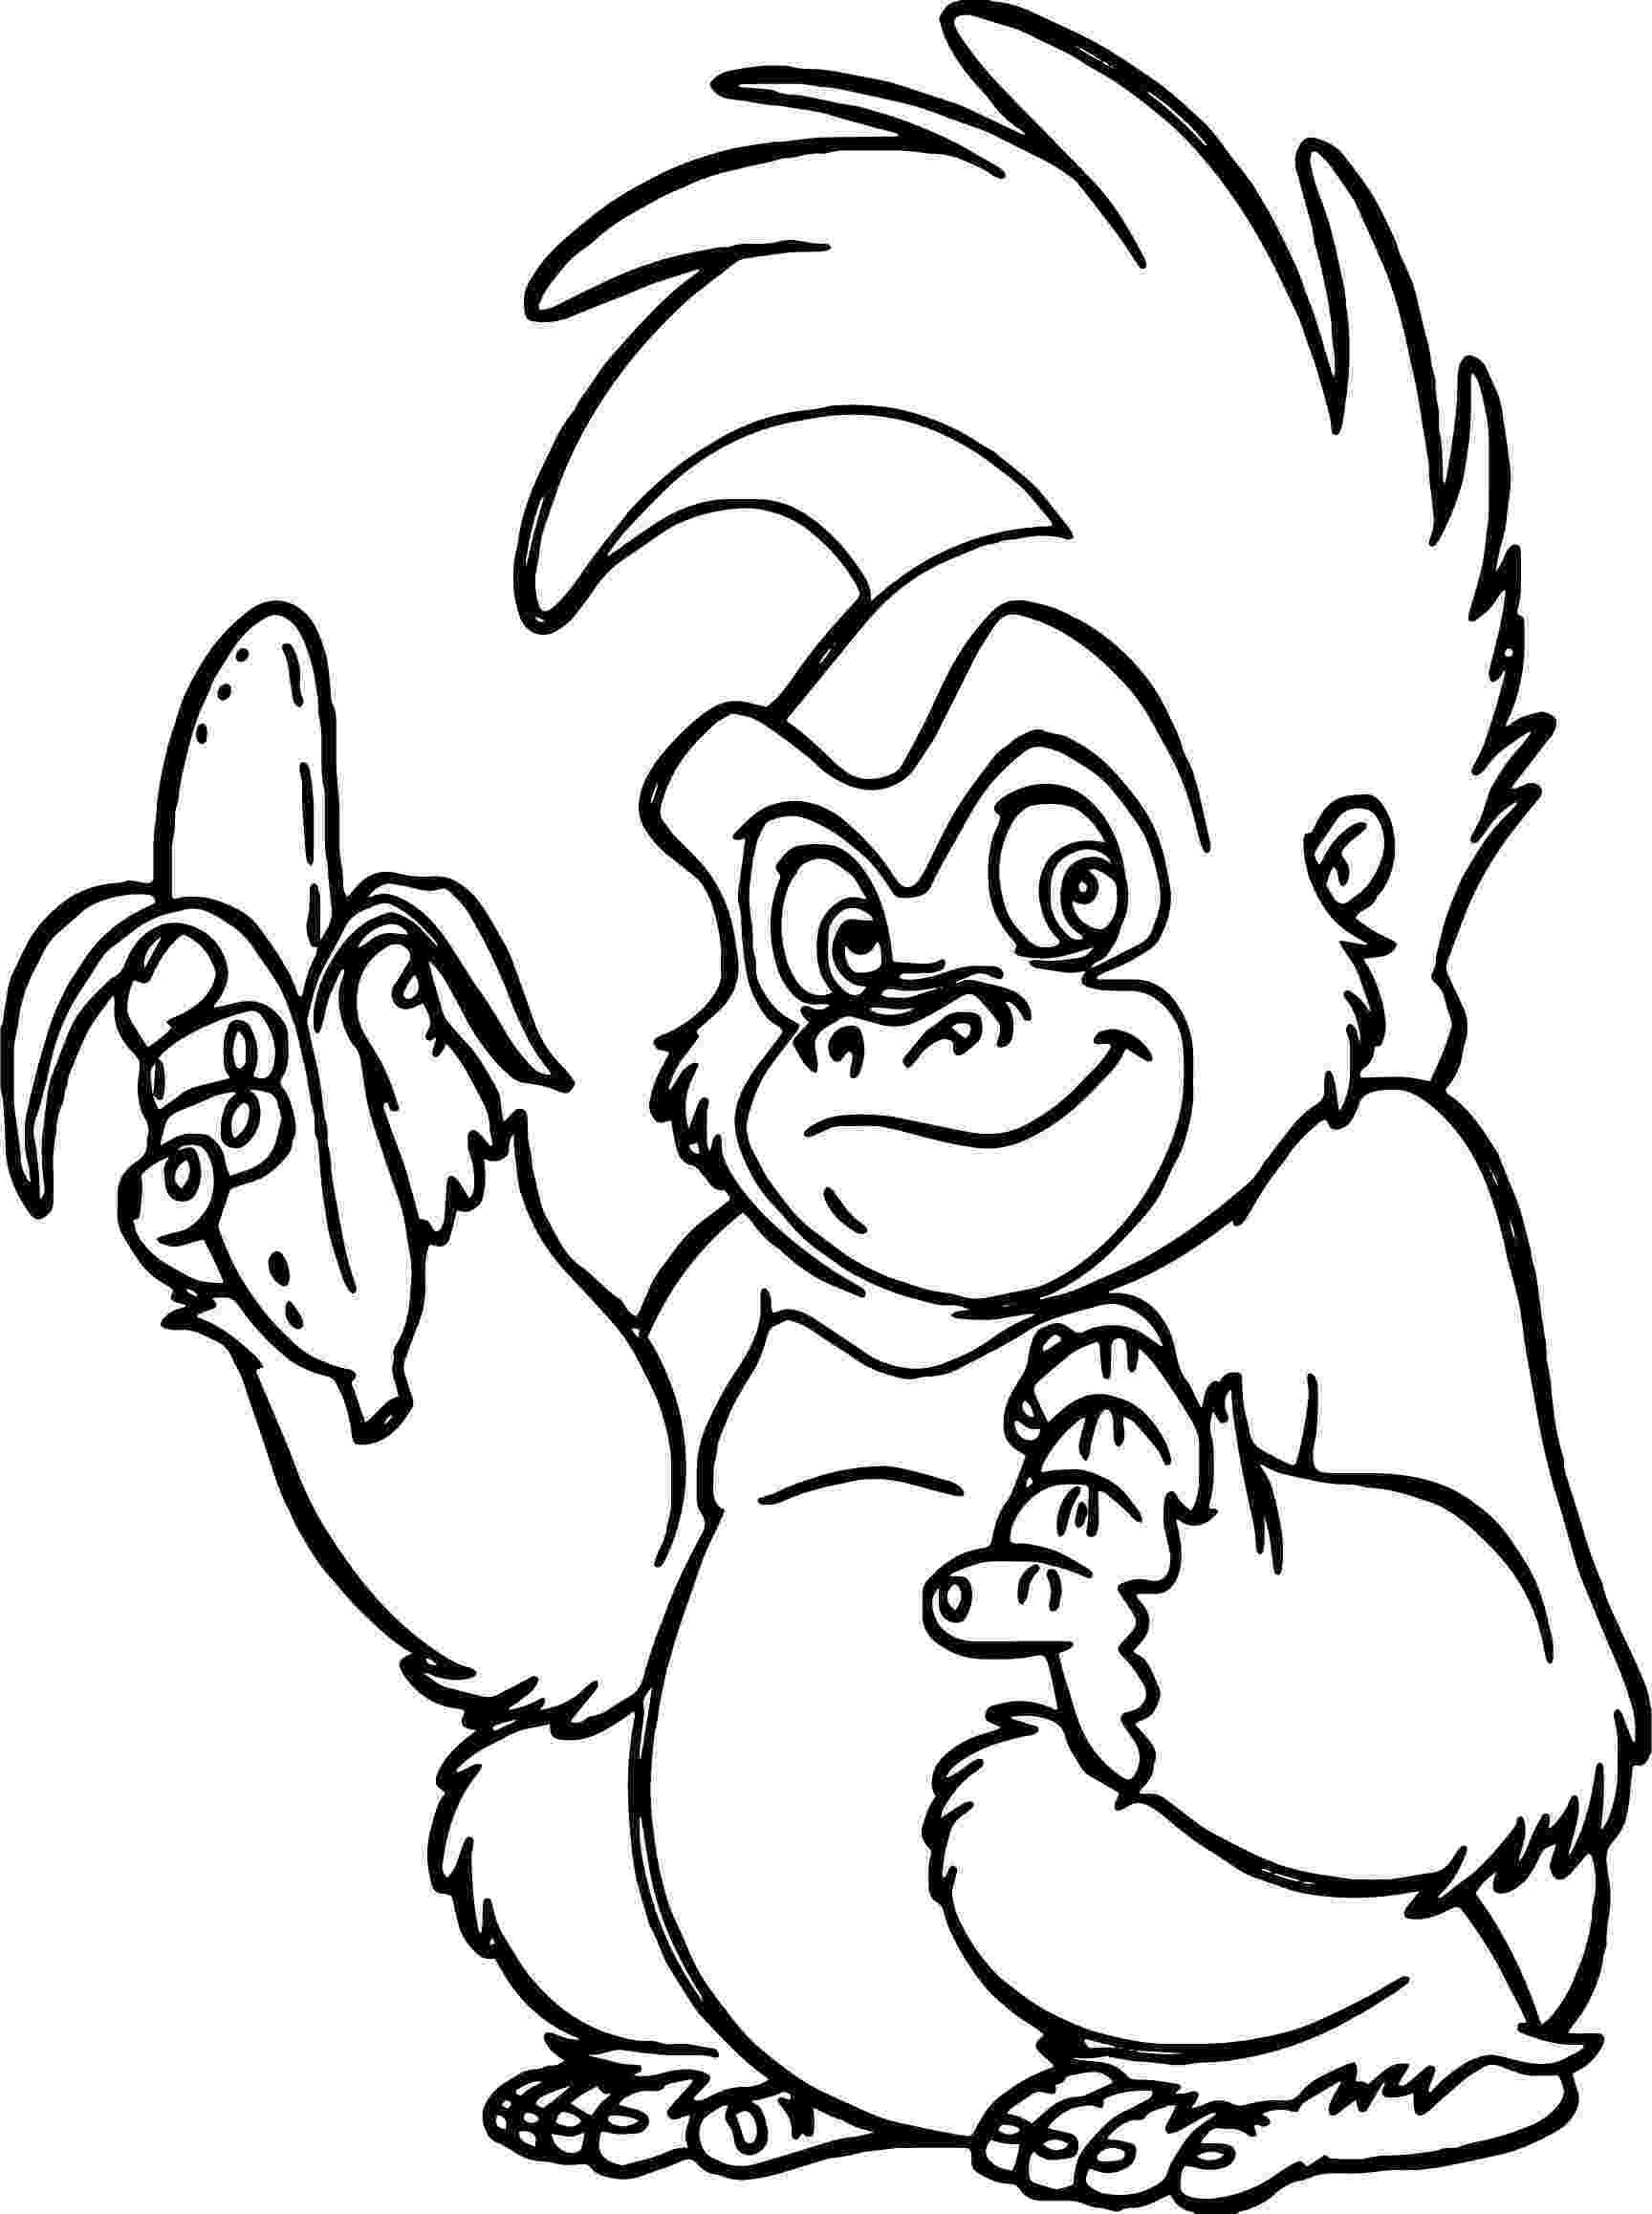 picture of banana for colouring banana coloring pages best coloring pages for kids colouring of for banana picture 